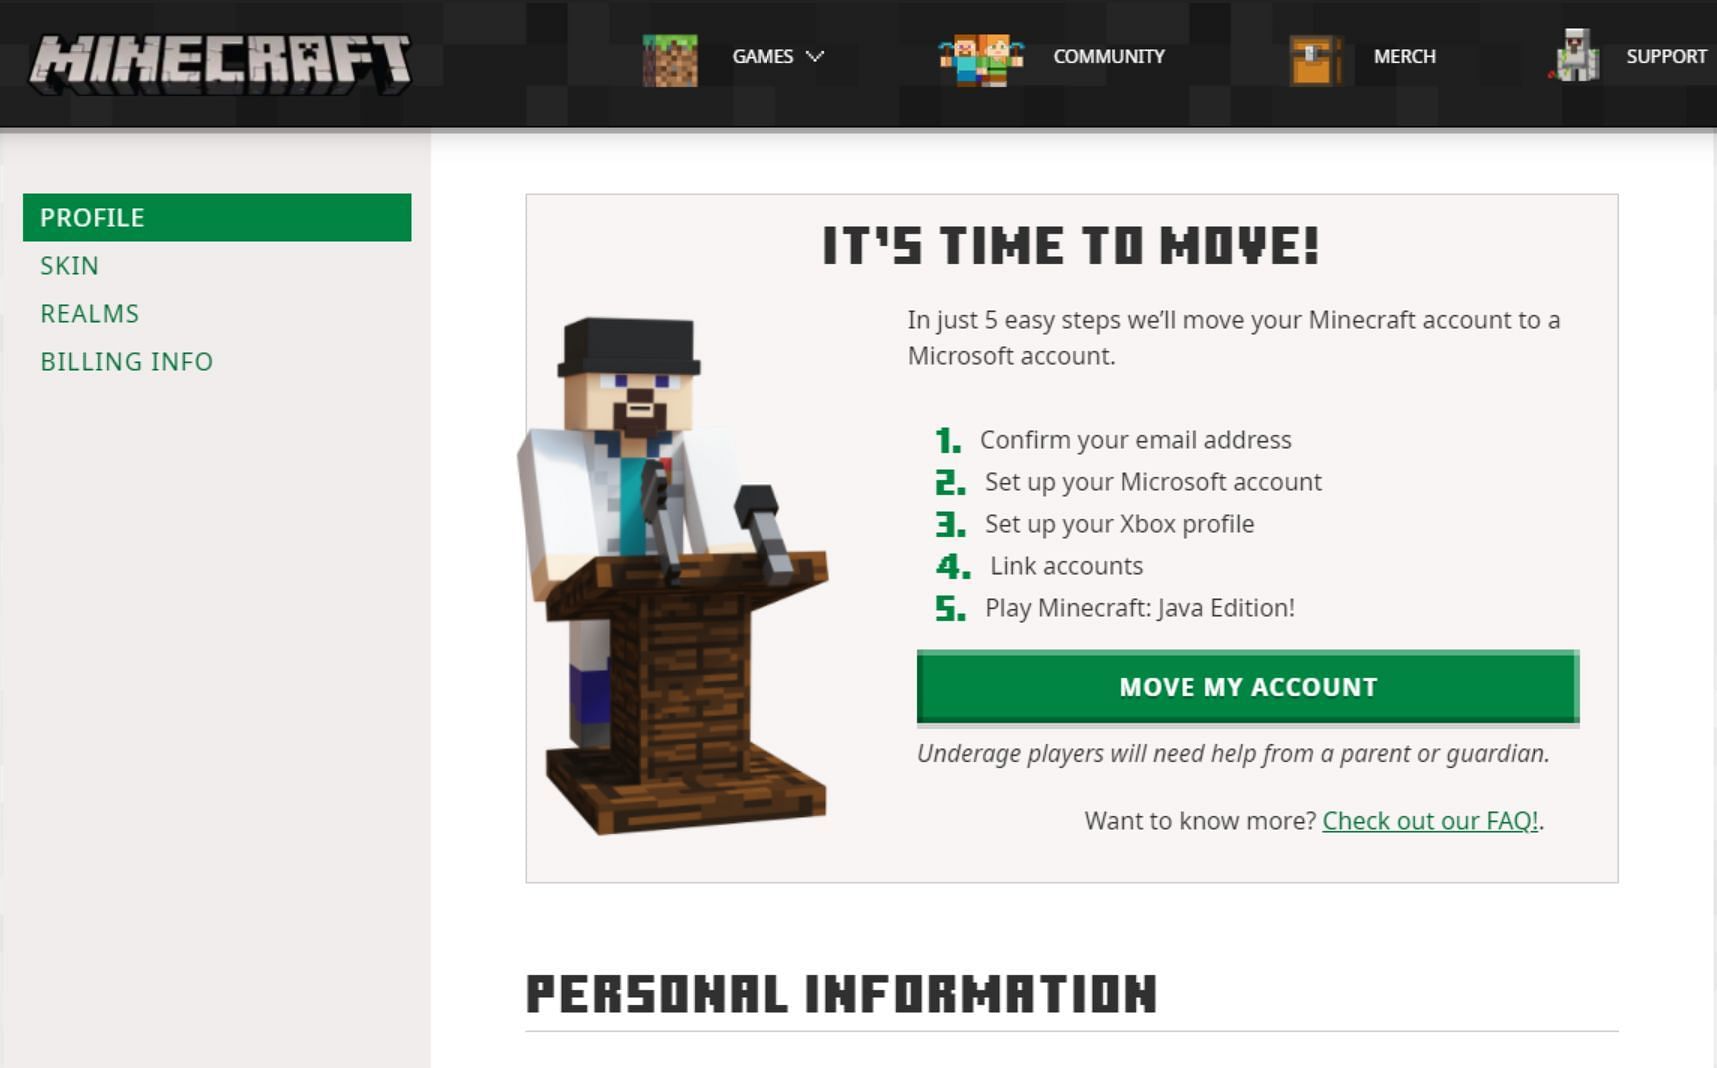 How to complete mandatory migration in Minecraft Java Edition